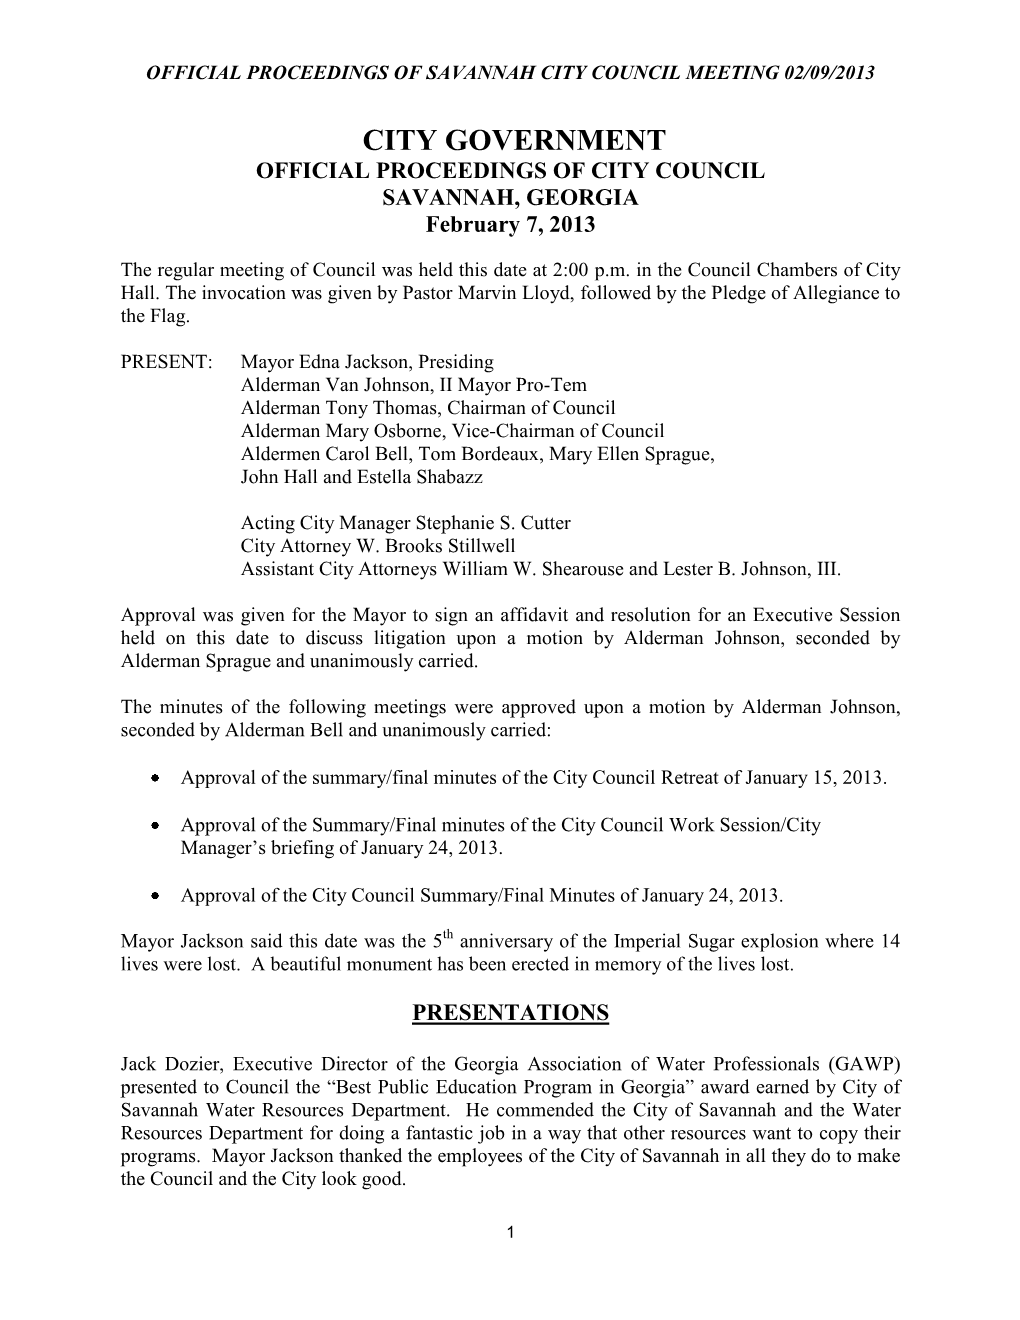 CITY GOVERNMENT OFFICIAL PROCEEDINGS of CITY COUNCIL SAVANNAH, GEORGIA February 7, 2013